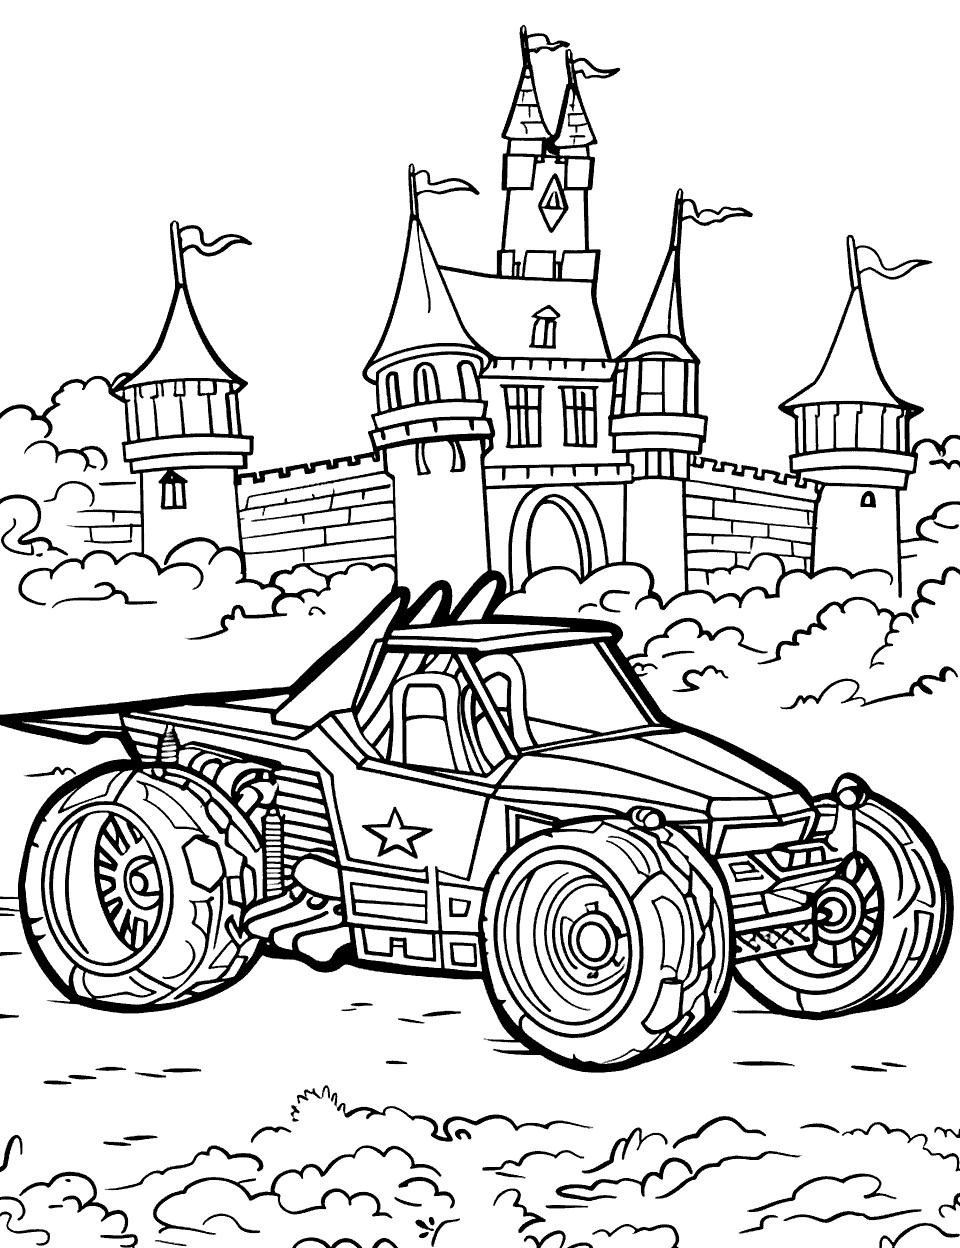 Knight's Castle Siege Coloring Page - A Hot Wheels car and a castle in the background.